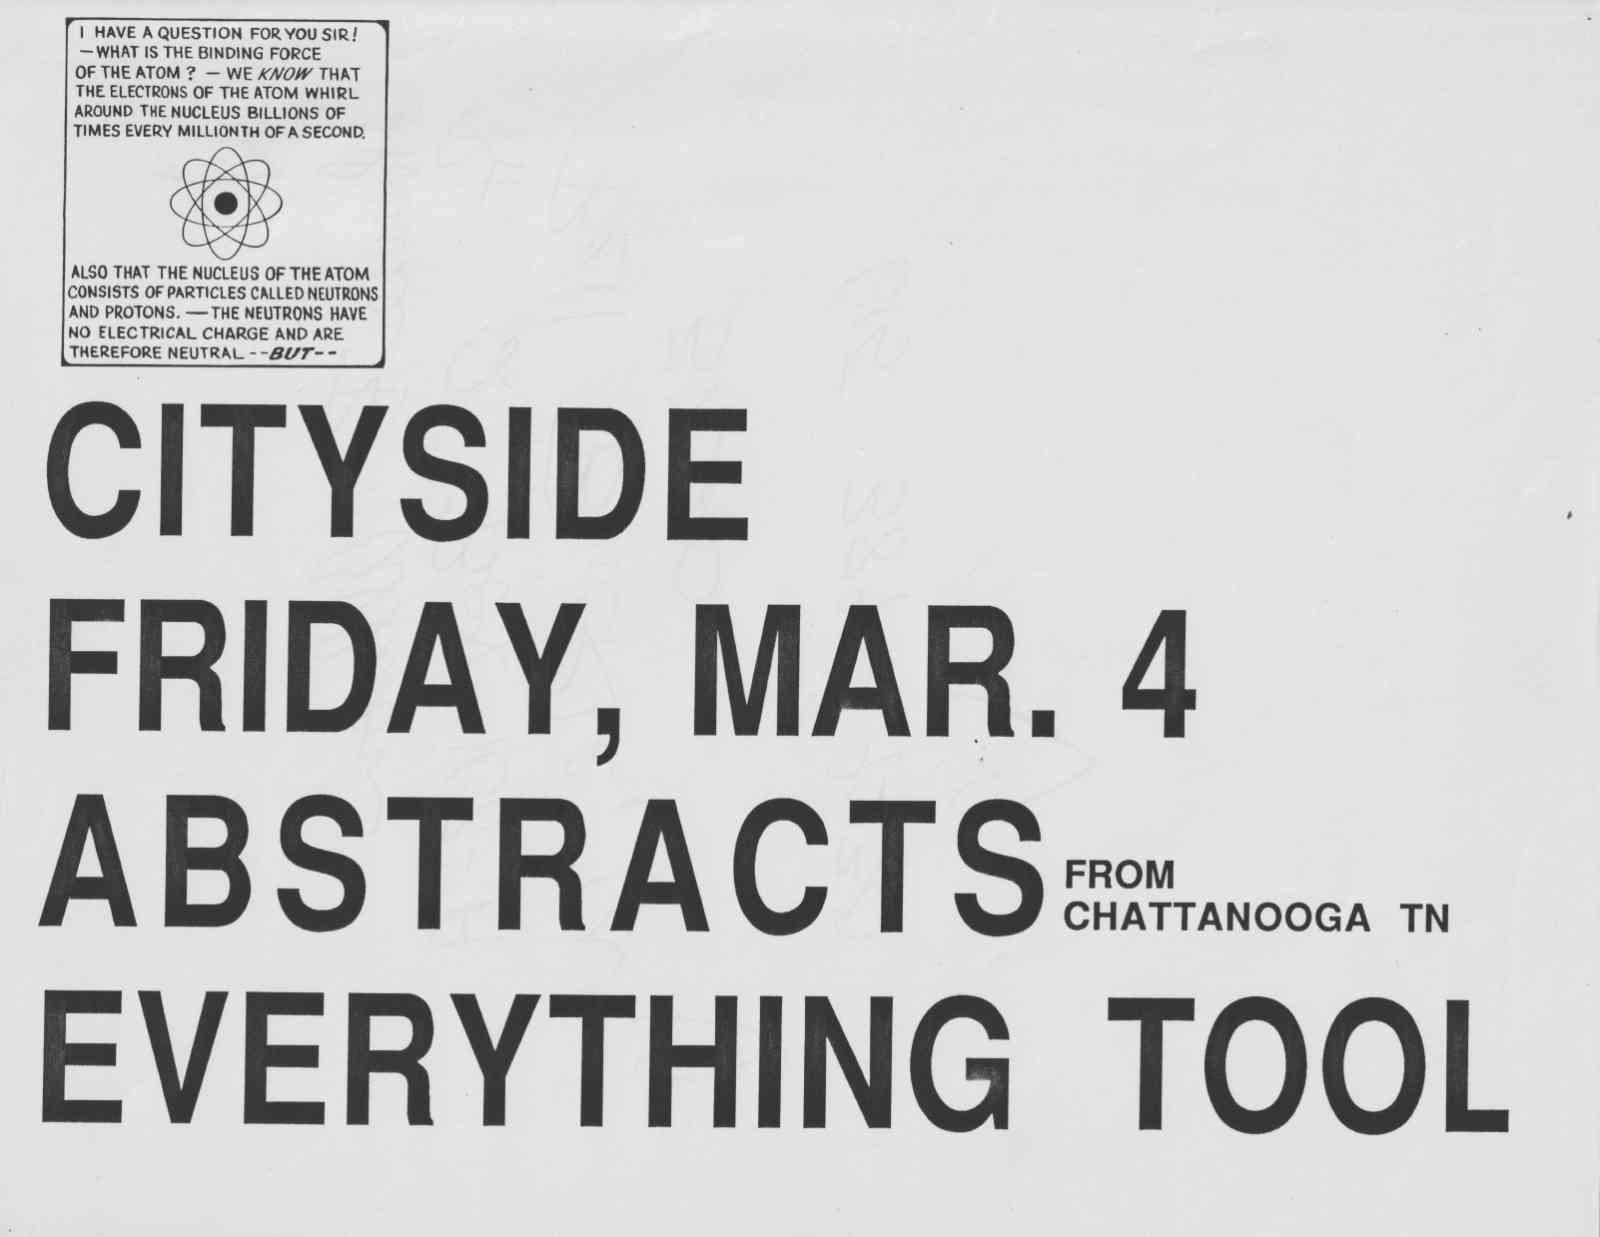 Everything Tool played with Abstracts at Cityside flyer